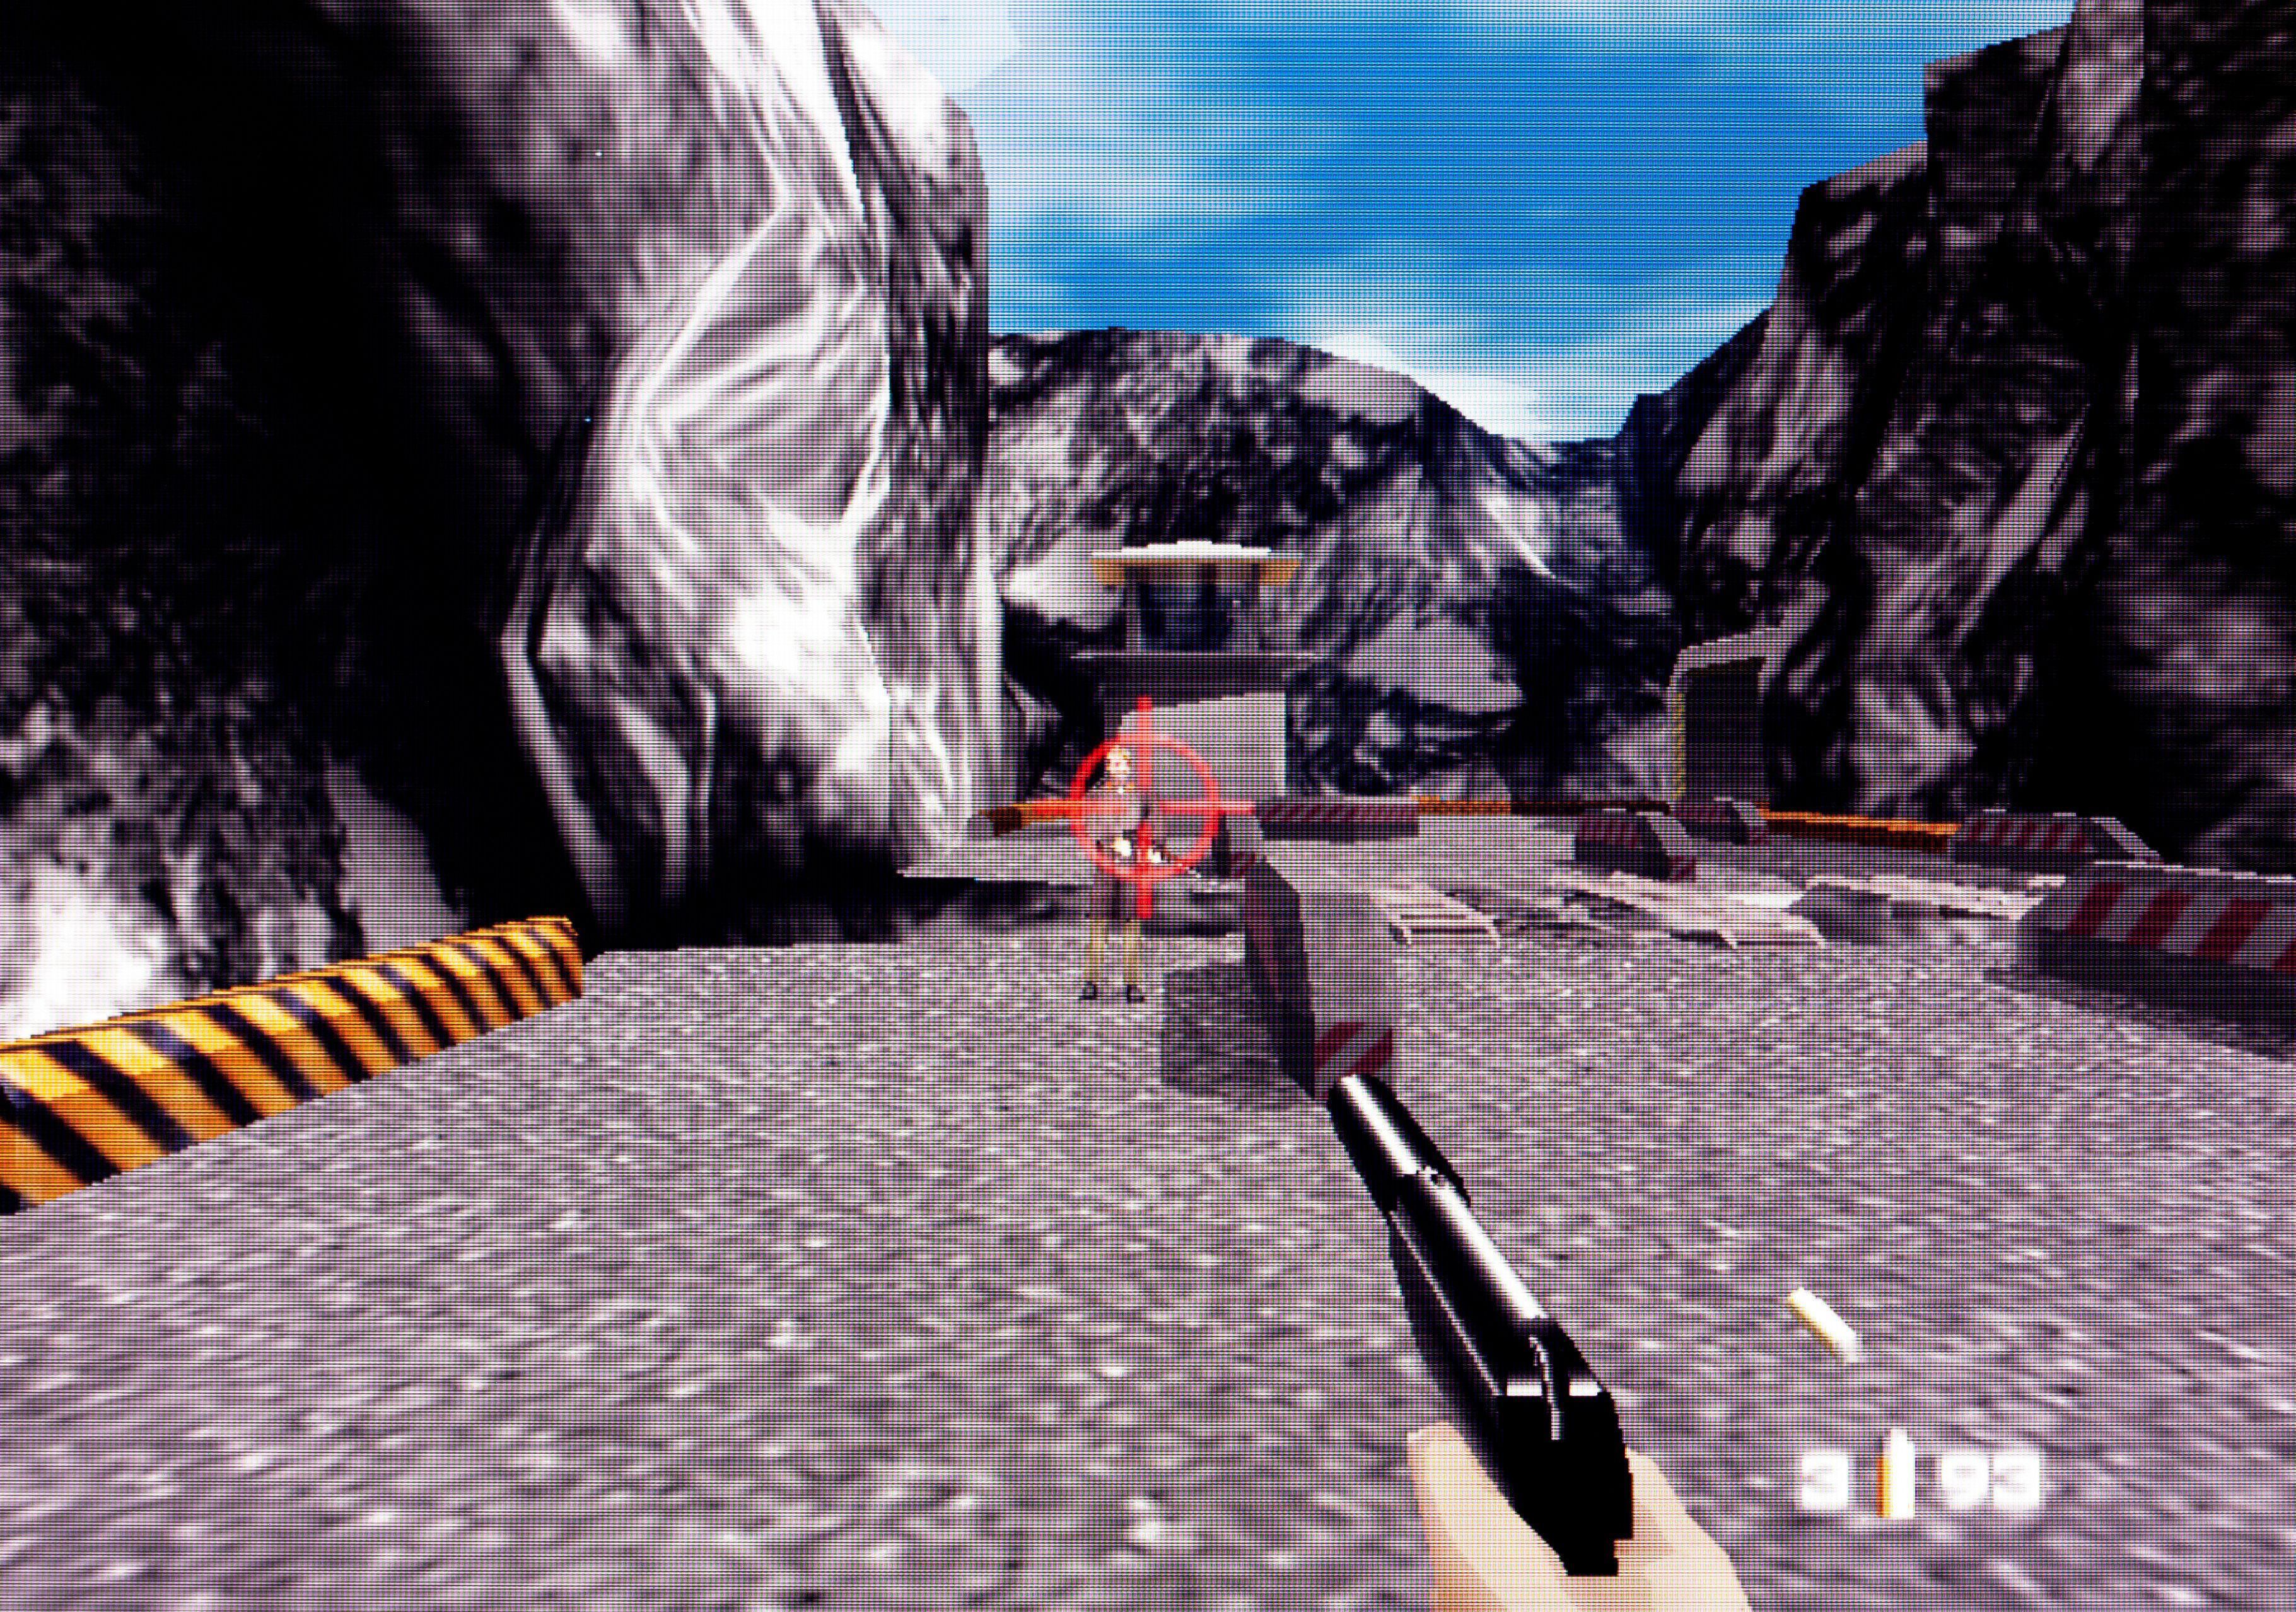 GoldenEye 007 Fan Video Game Remake Gives the Nintendo 64 Classic